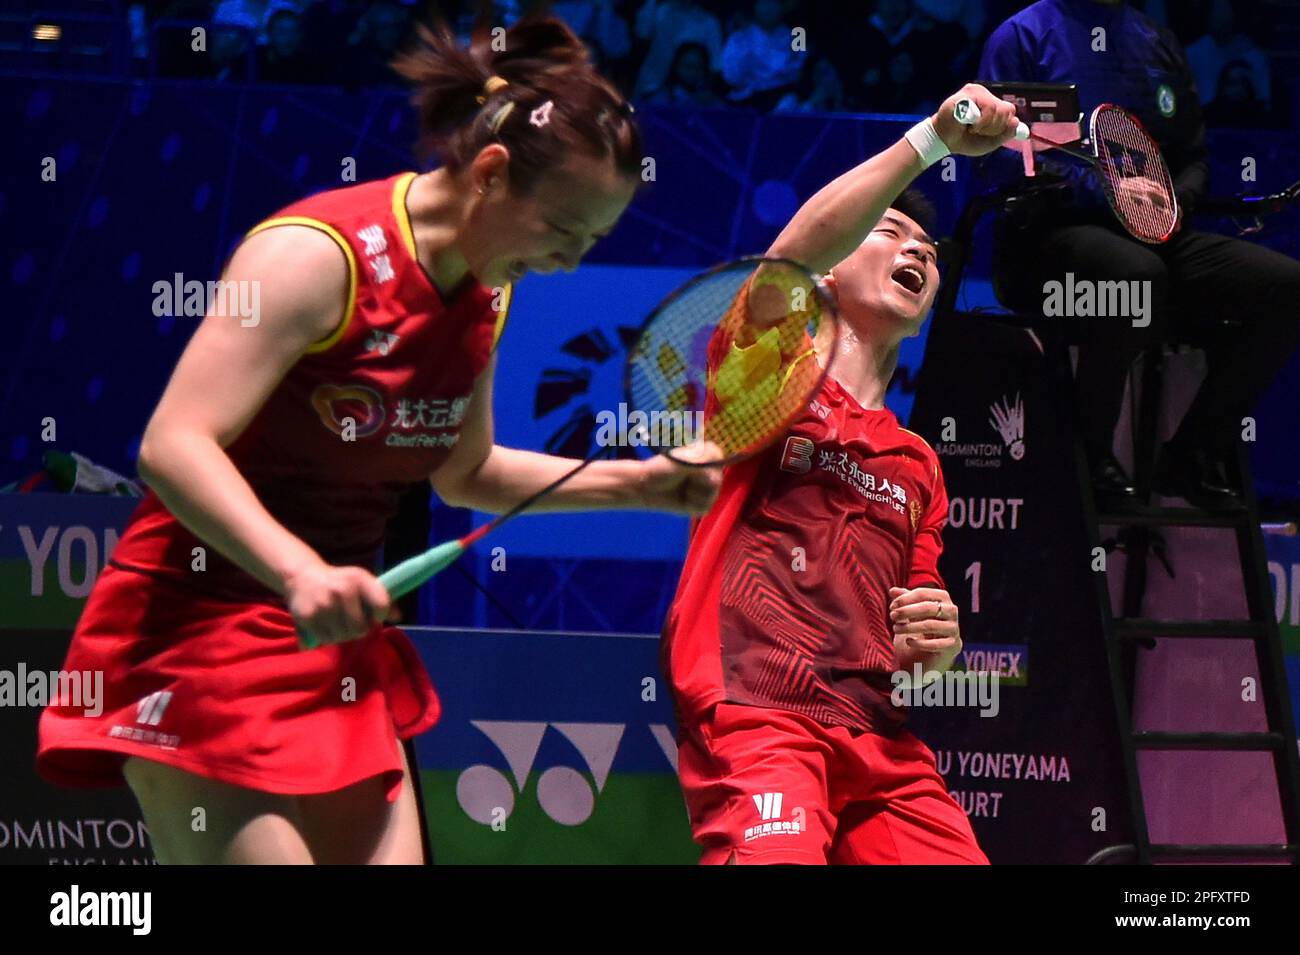 Chinas Zheng Si Wei, right, and Huang Ya Qiong react after winning their mixed double final match against Koreas Seo Seung Jae and Chae Yu Yung in the All England Open Badminton